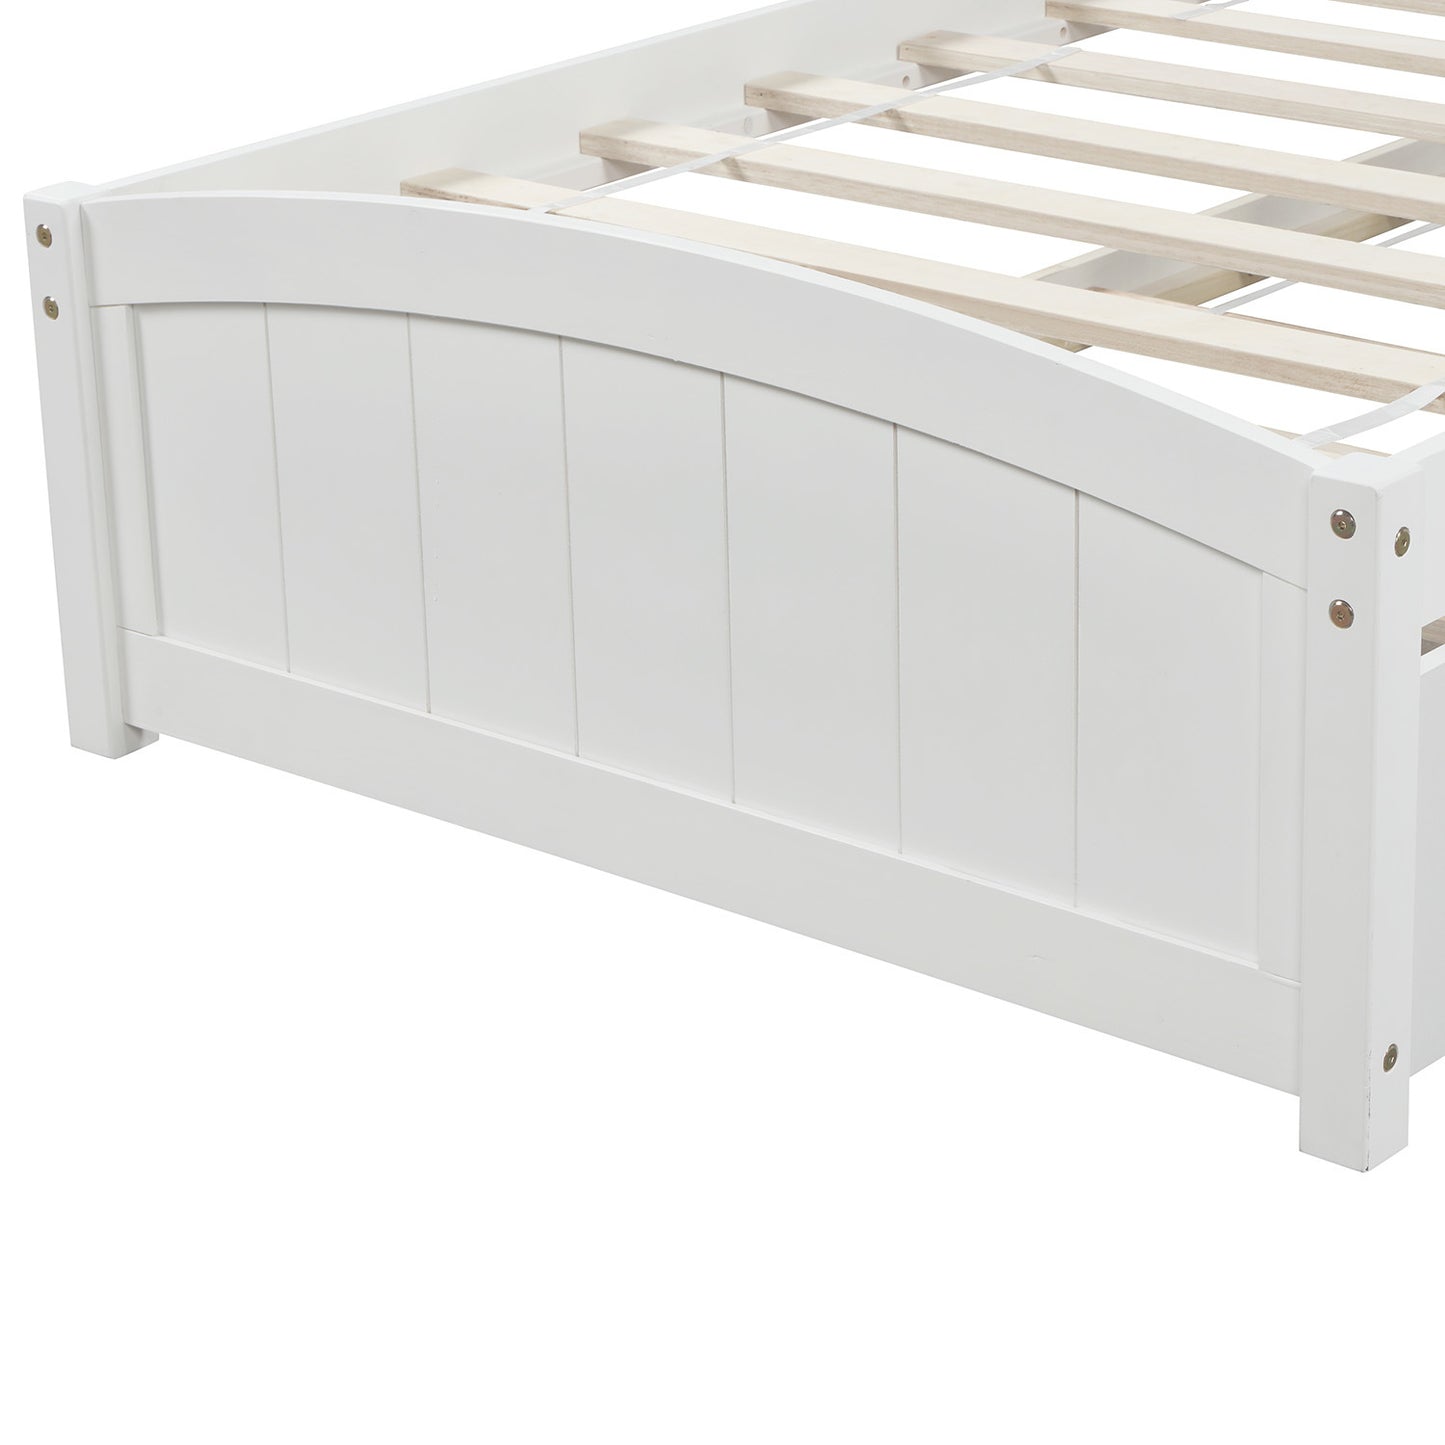 Twin size Platform Bed with Trundle; White